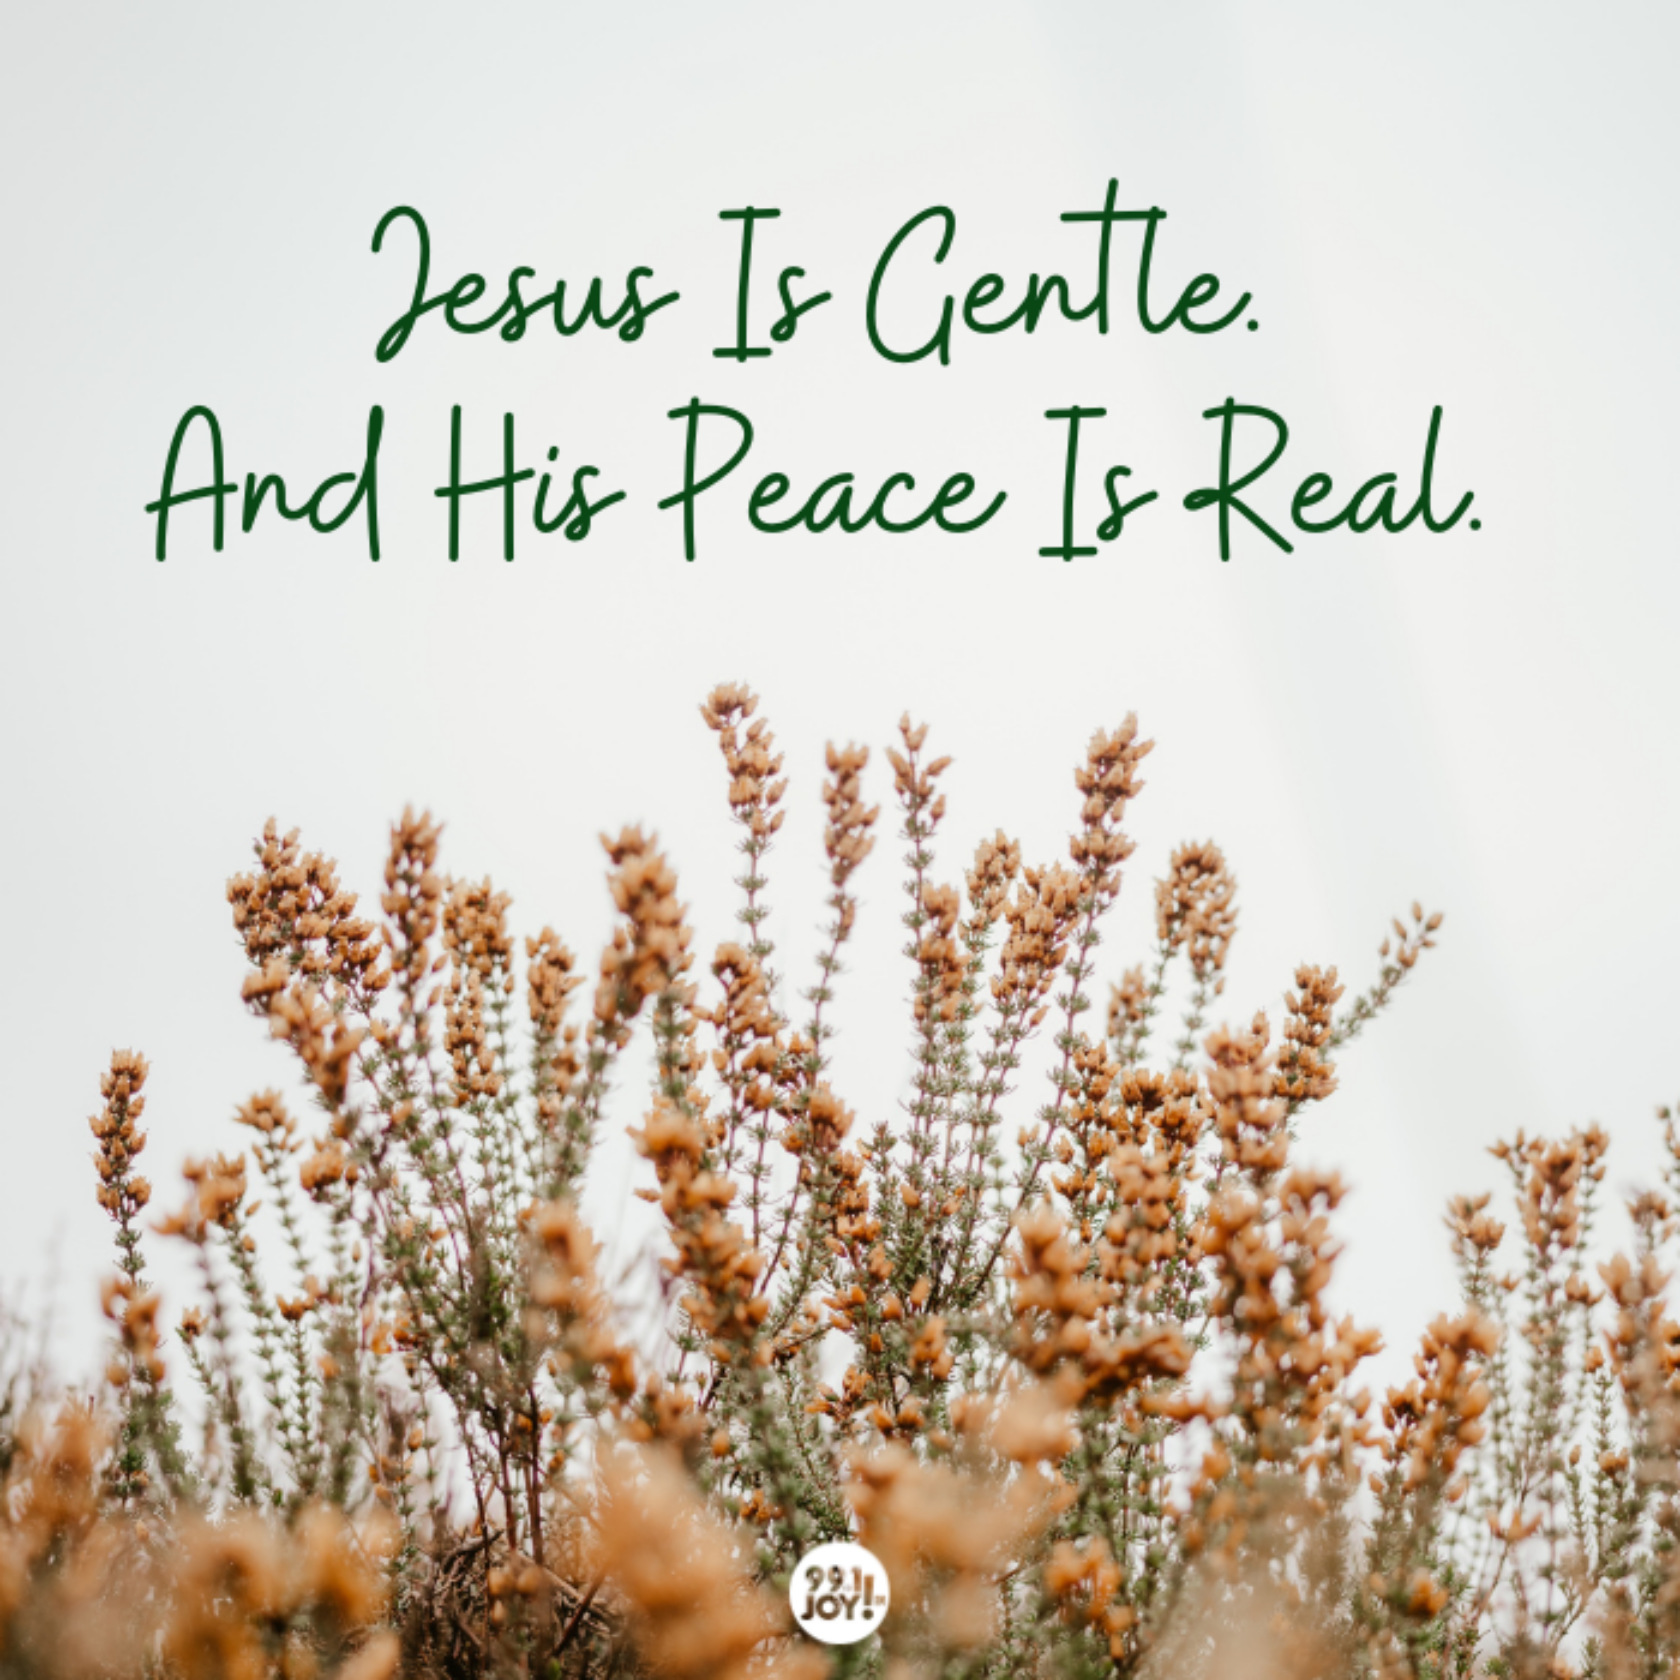 Jesus Is Gentle. And His Peace Is Real. 